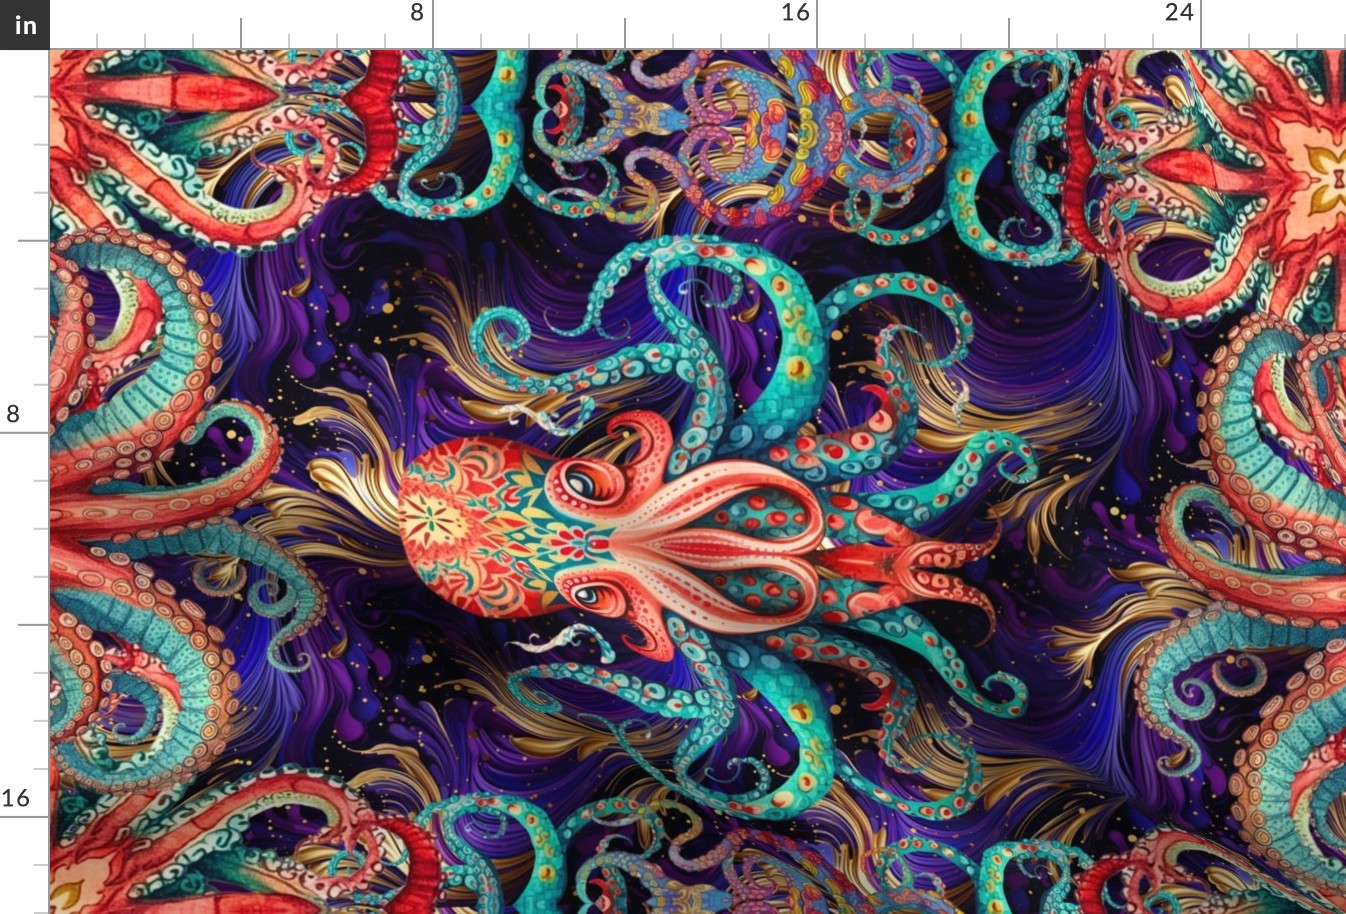 FAT QUARTER PANEL OCTOPUS TENTACLE 5 PSYCHEDELIC PURPLE GOLD FLWRHT